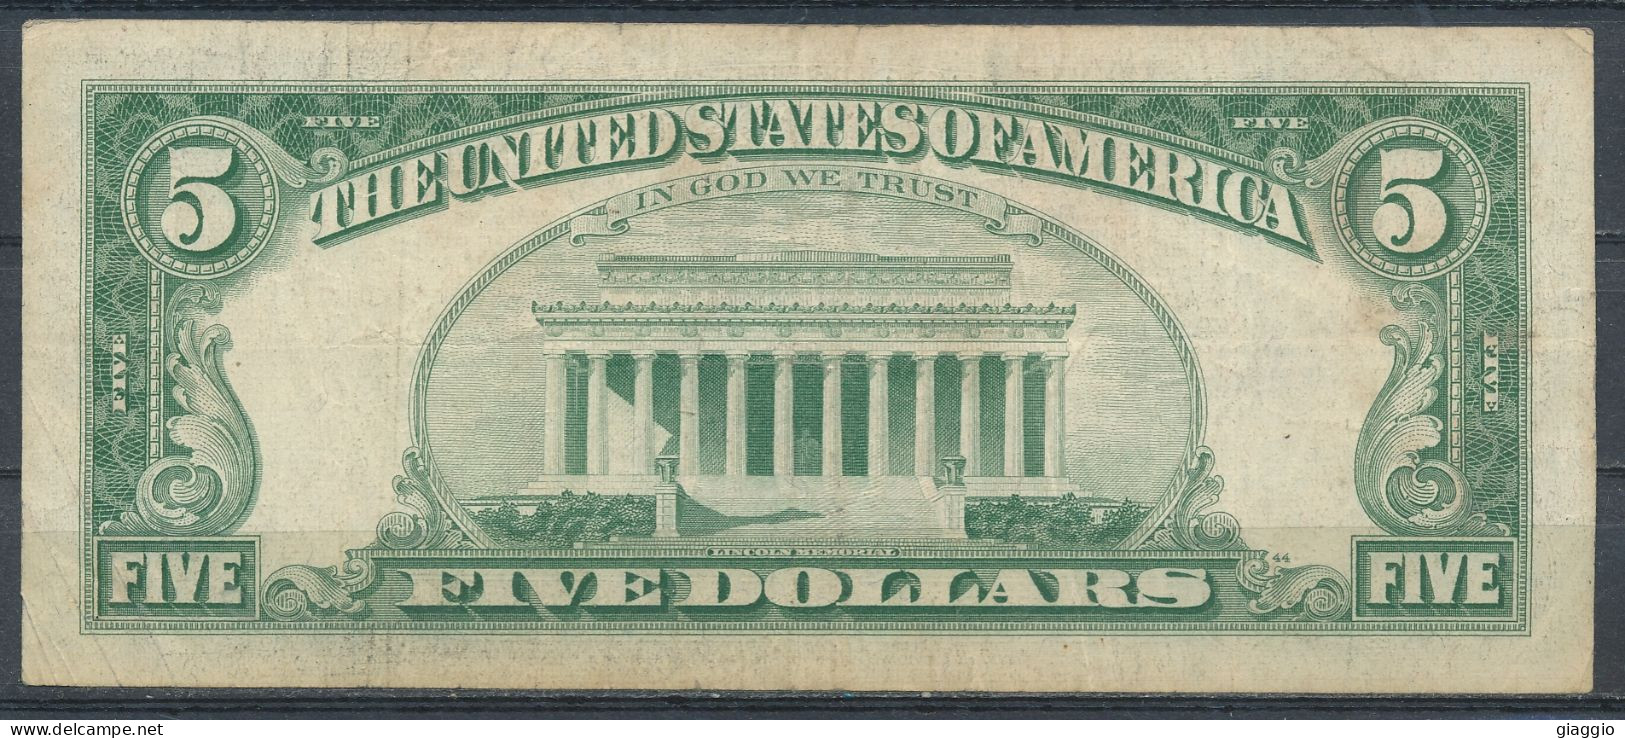 °°° USA 5 DOLLARS 1963 C °°° - Federal Reserve Notes (1928-...)